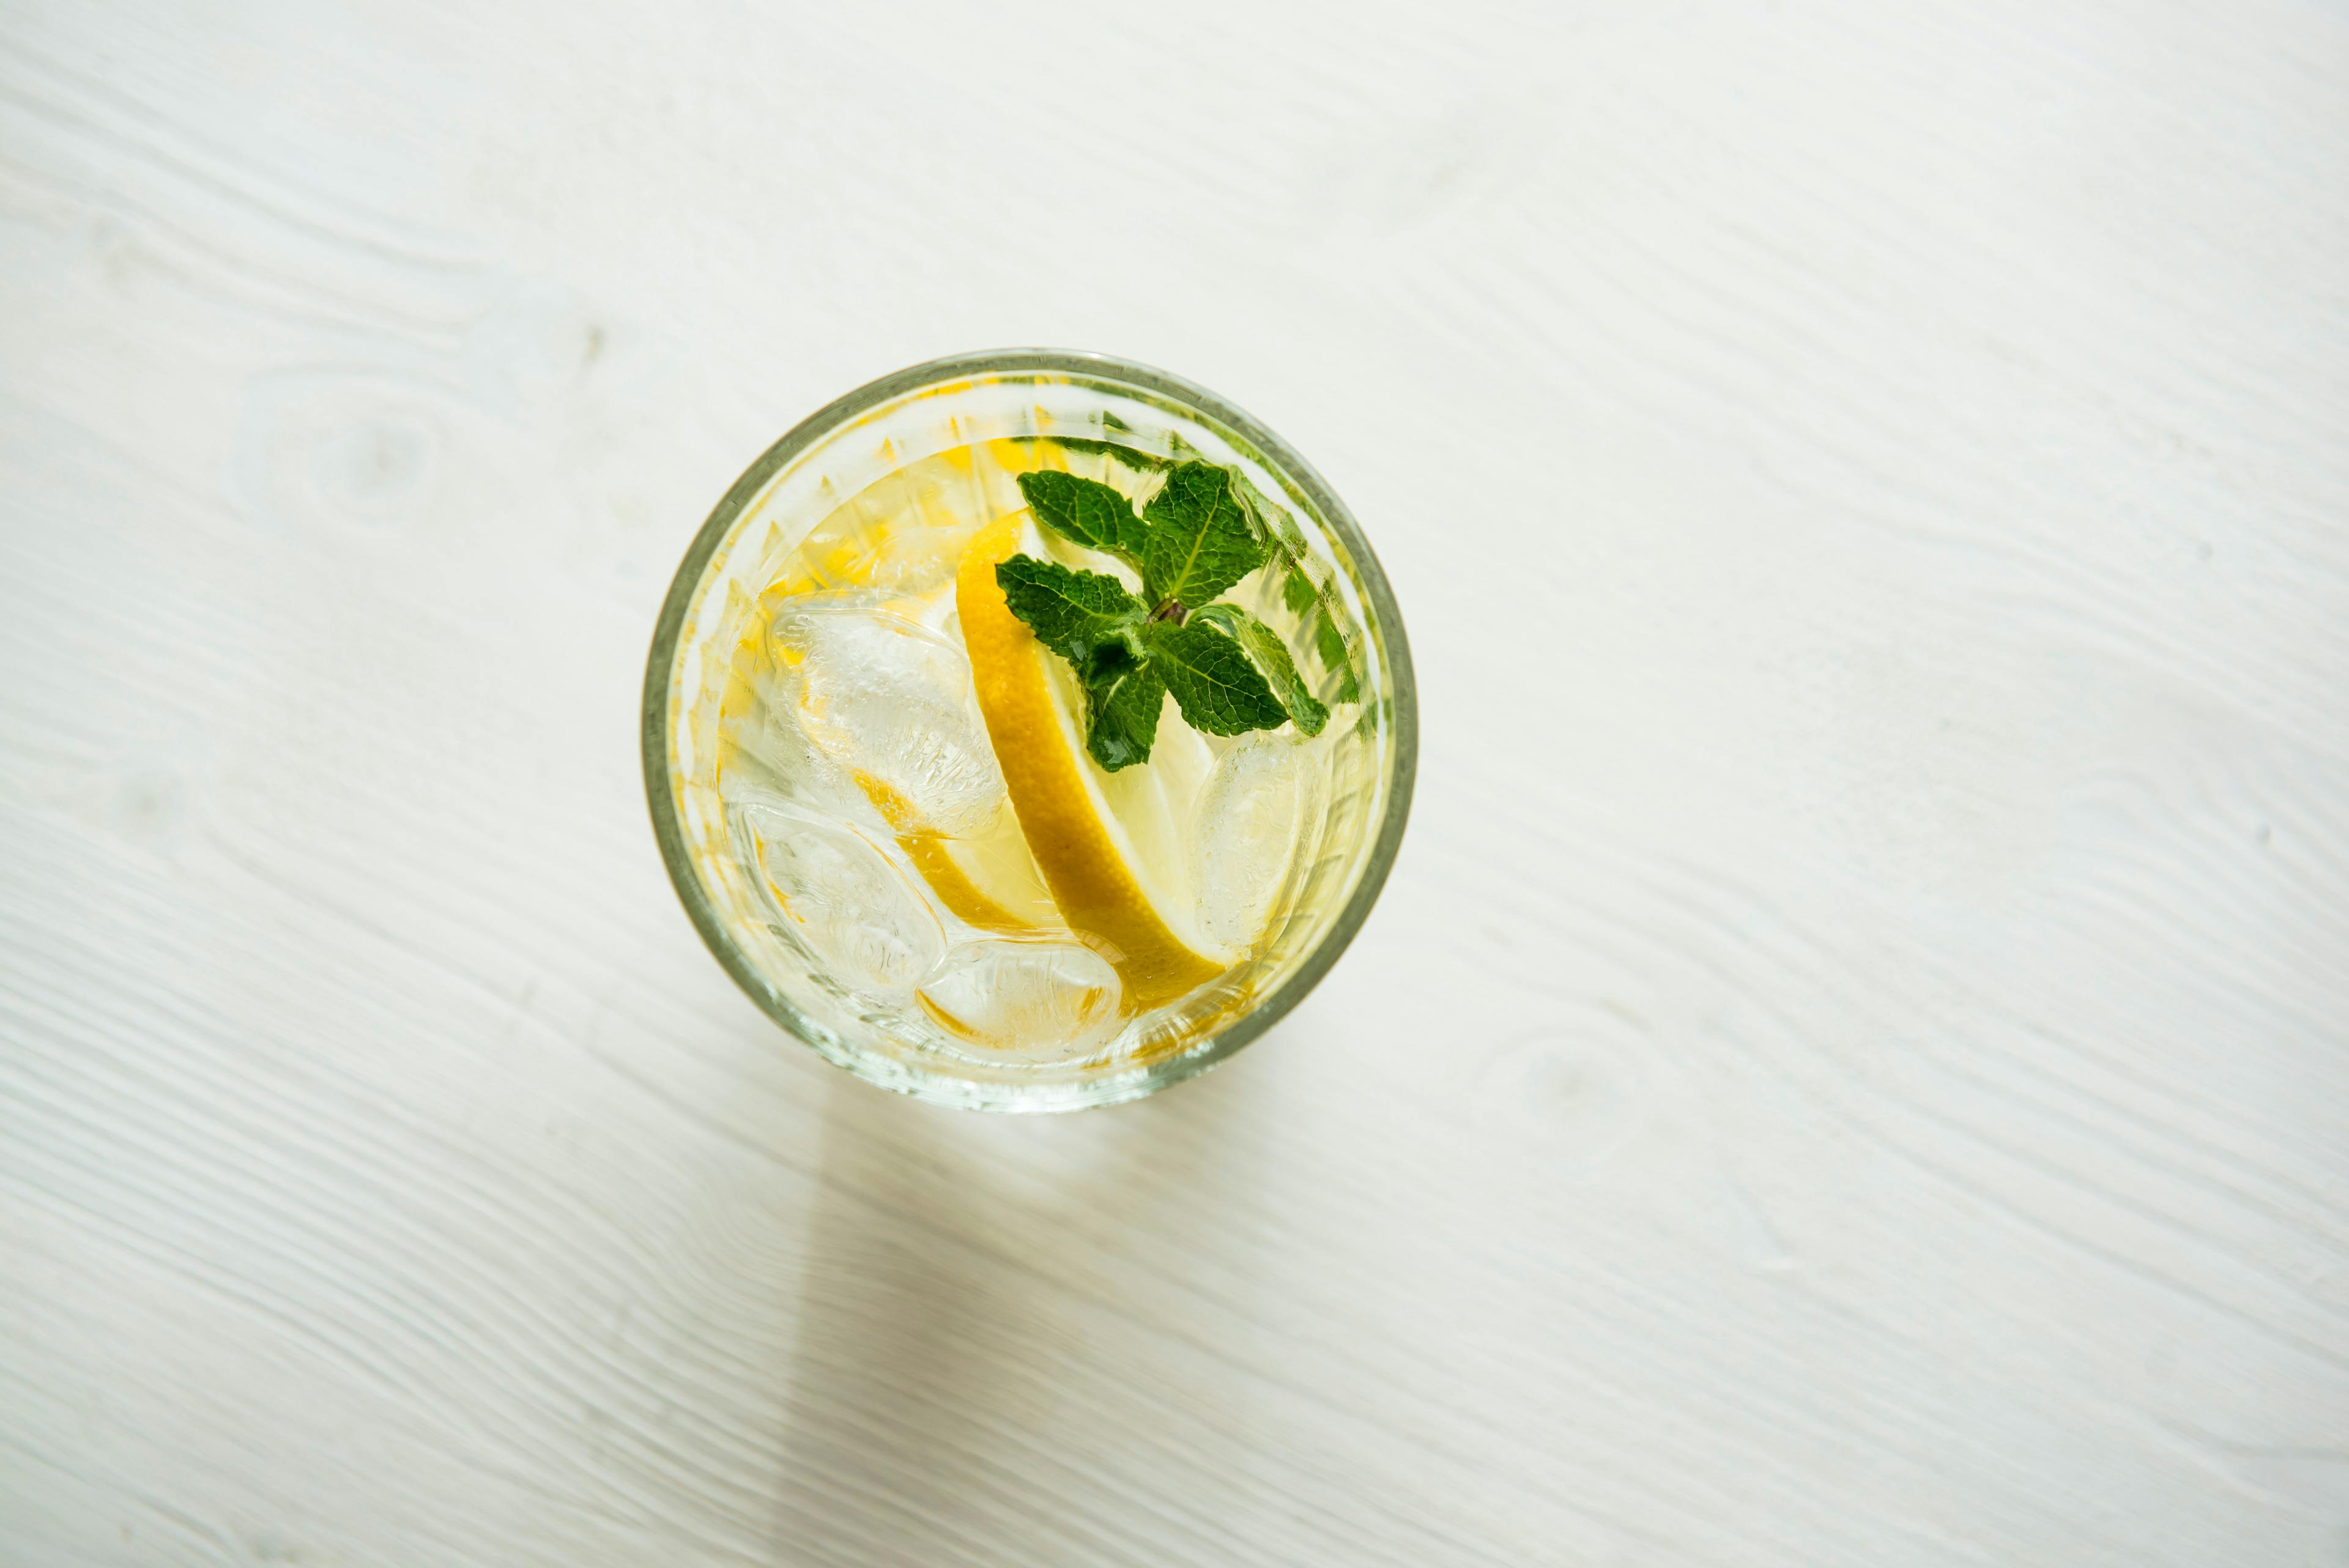 An aerial view of a glass of water garnished with a lemon wedge and herb.